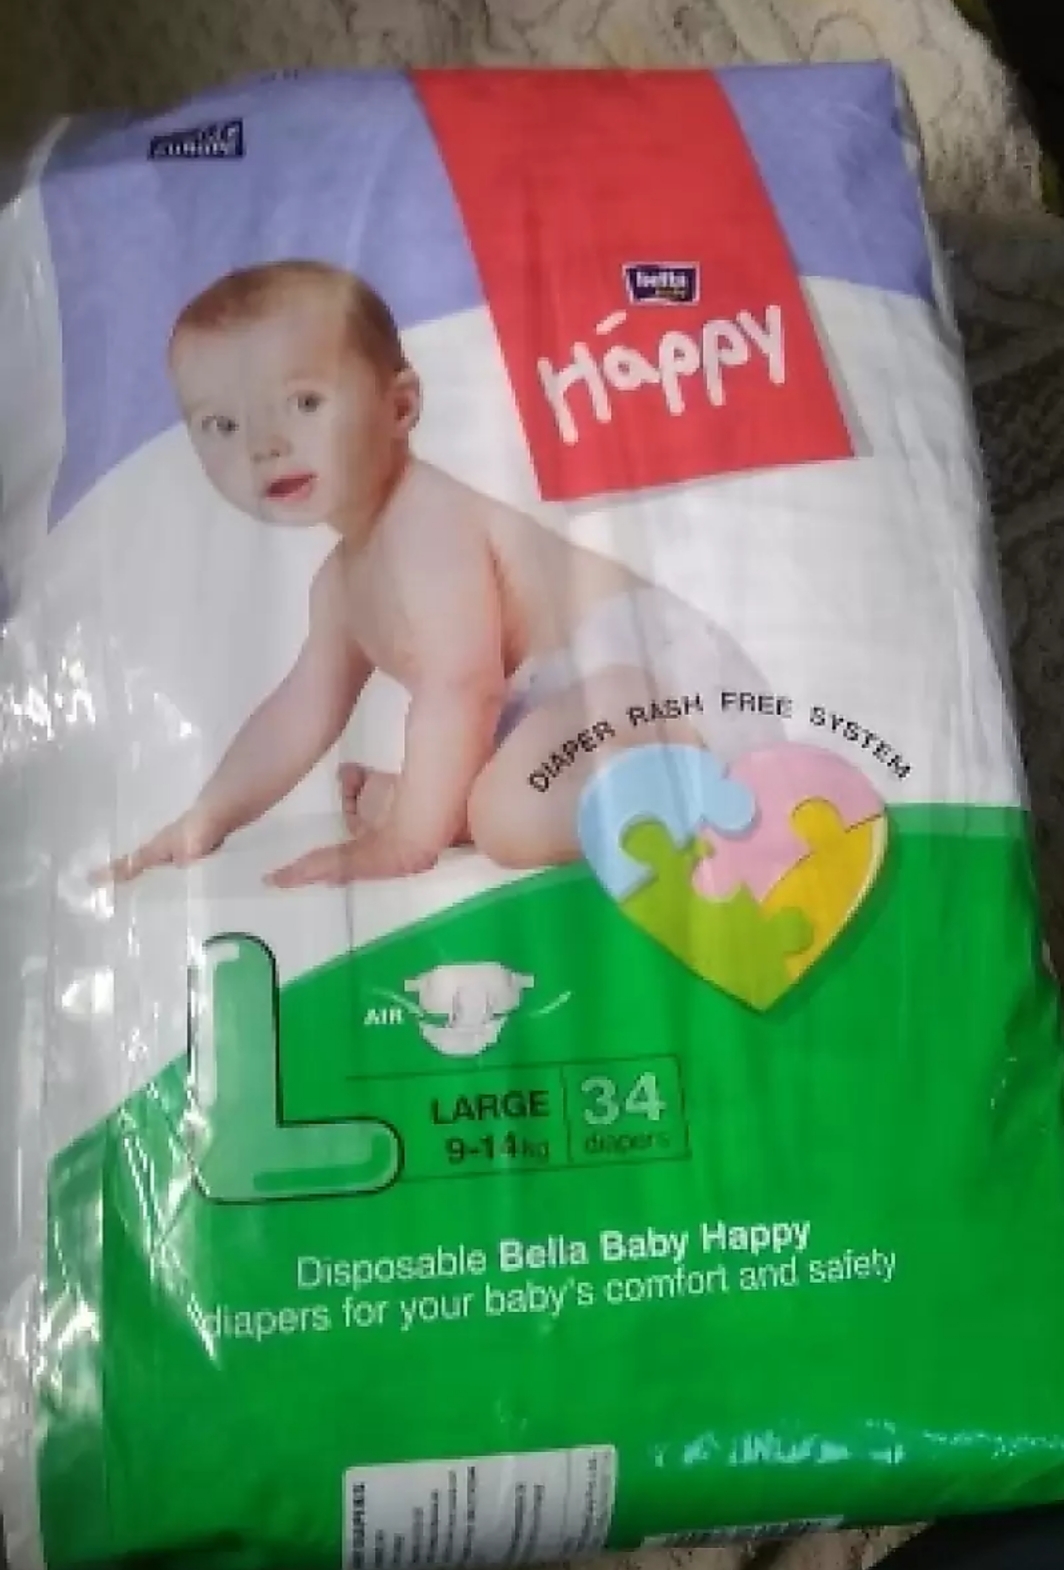 bella baby happy diapers small